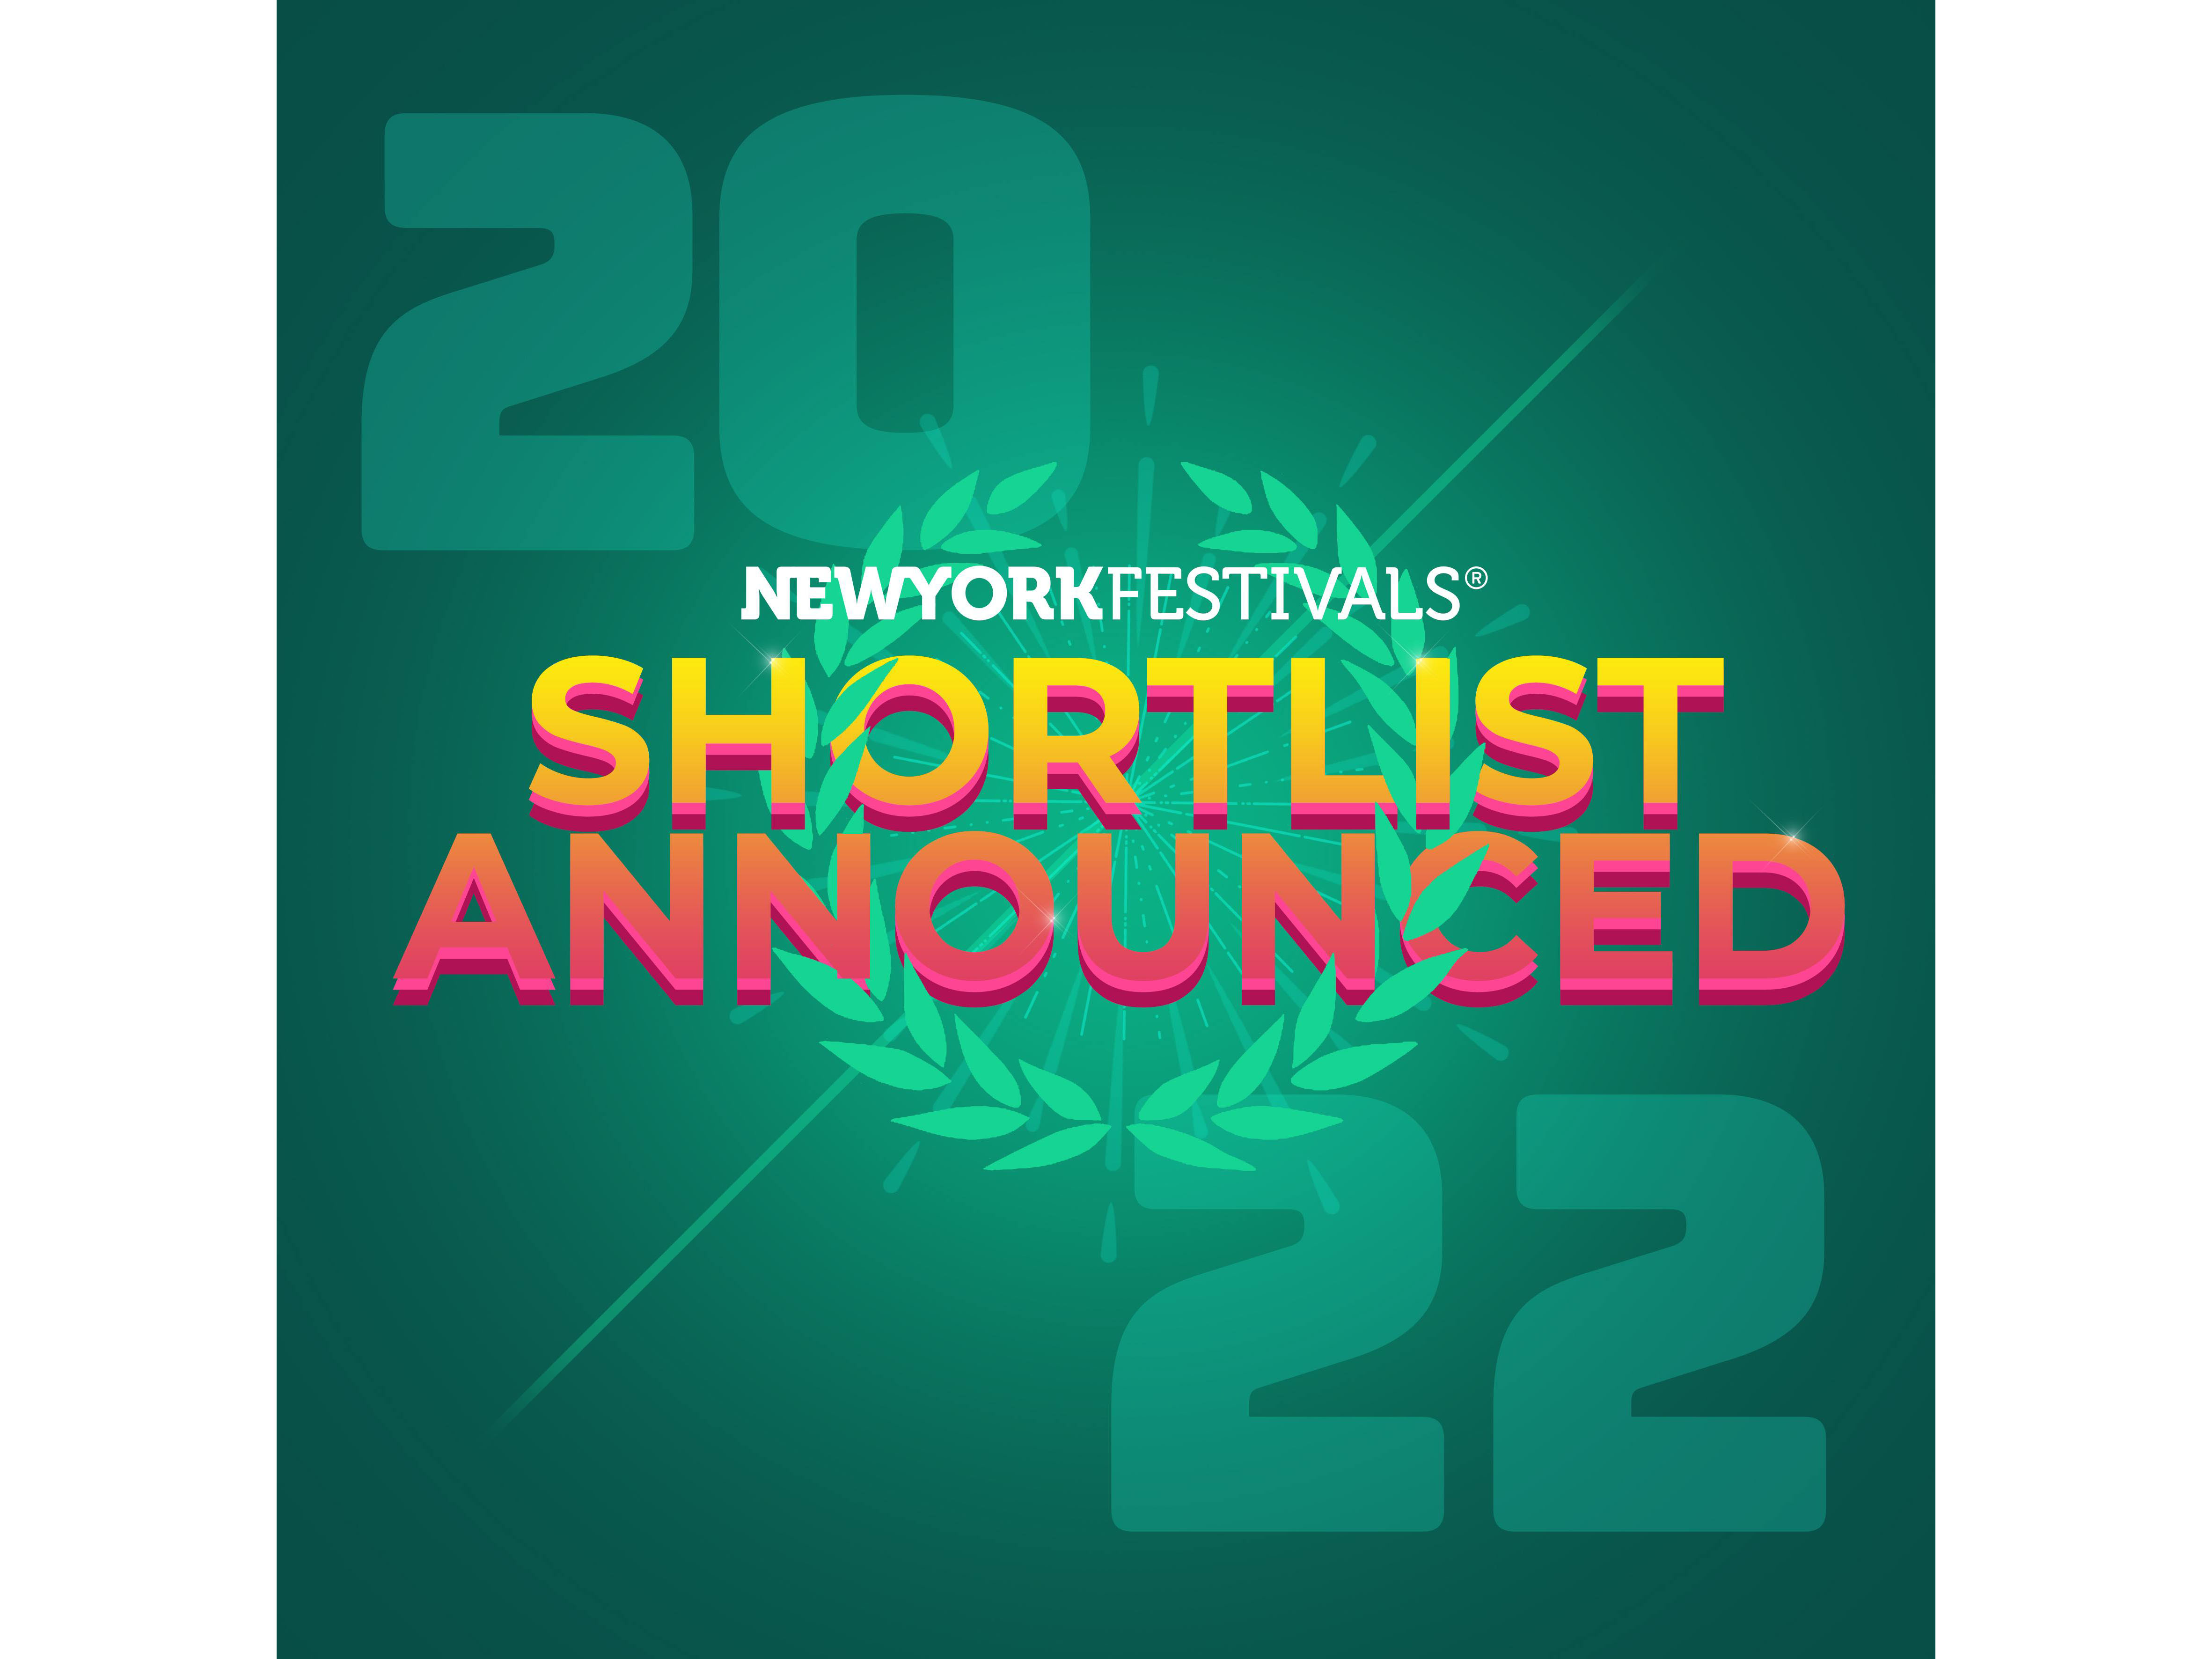 Seven agencies from the Middle East make it into New York Festivals 2022 Advertising Awards' Shortlist 